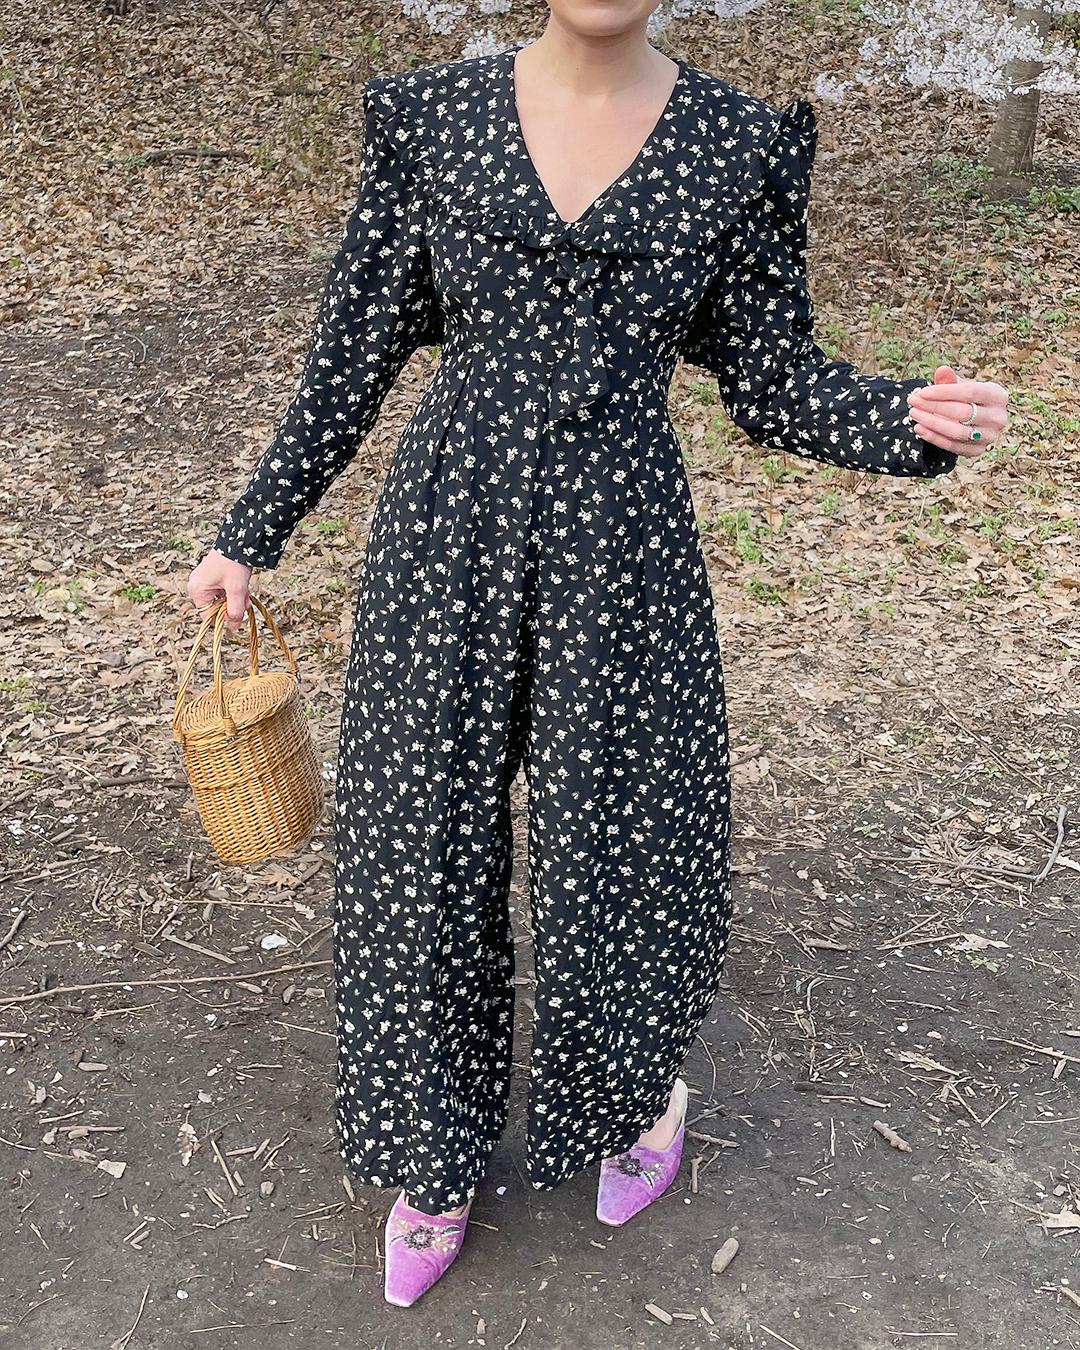 VERY BREEZY presents: I fell in love with this vintage jumpsuit, and putting it on actually made me even more obsessed. If you're not a jumpsuit person, hear me out: this one is so flattering! Circa 1980s, the slightly padded shoulders, fitted